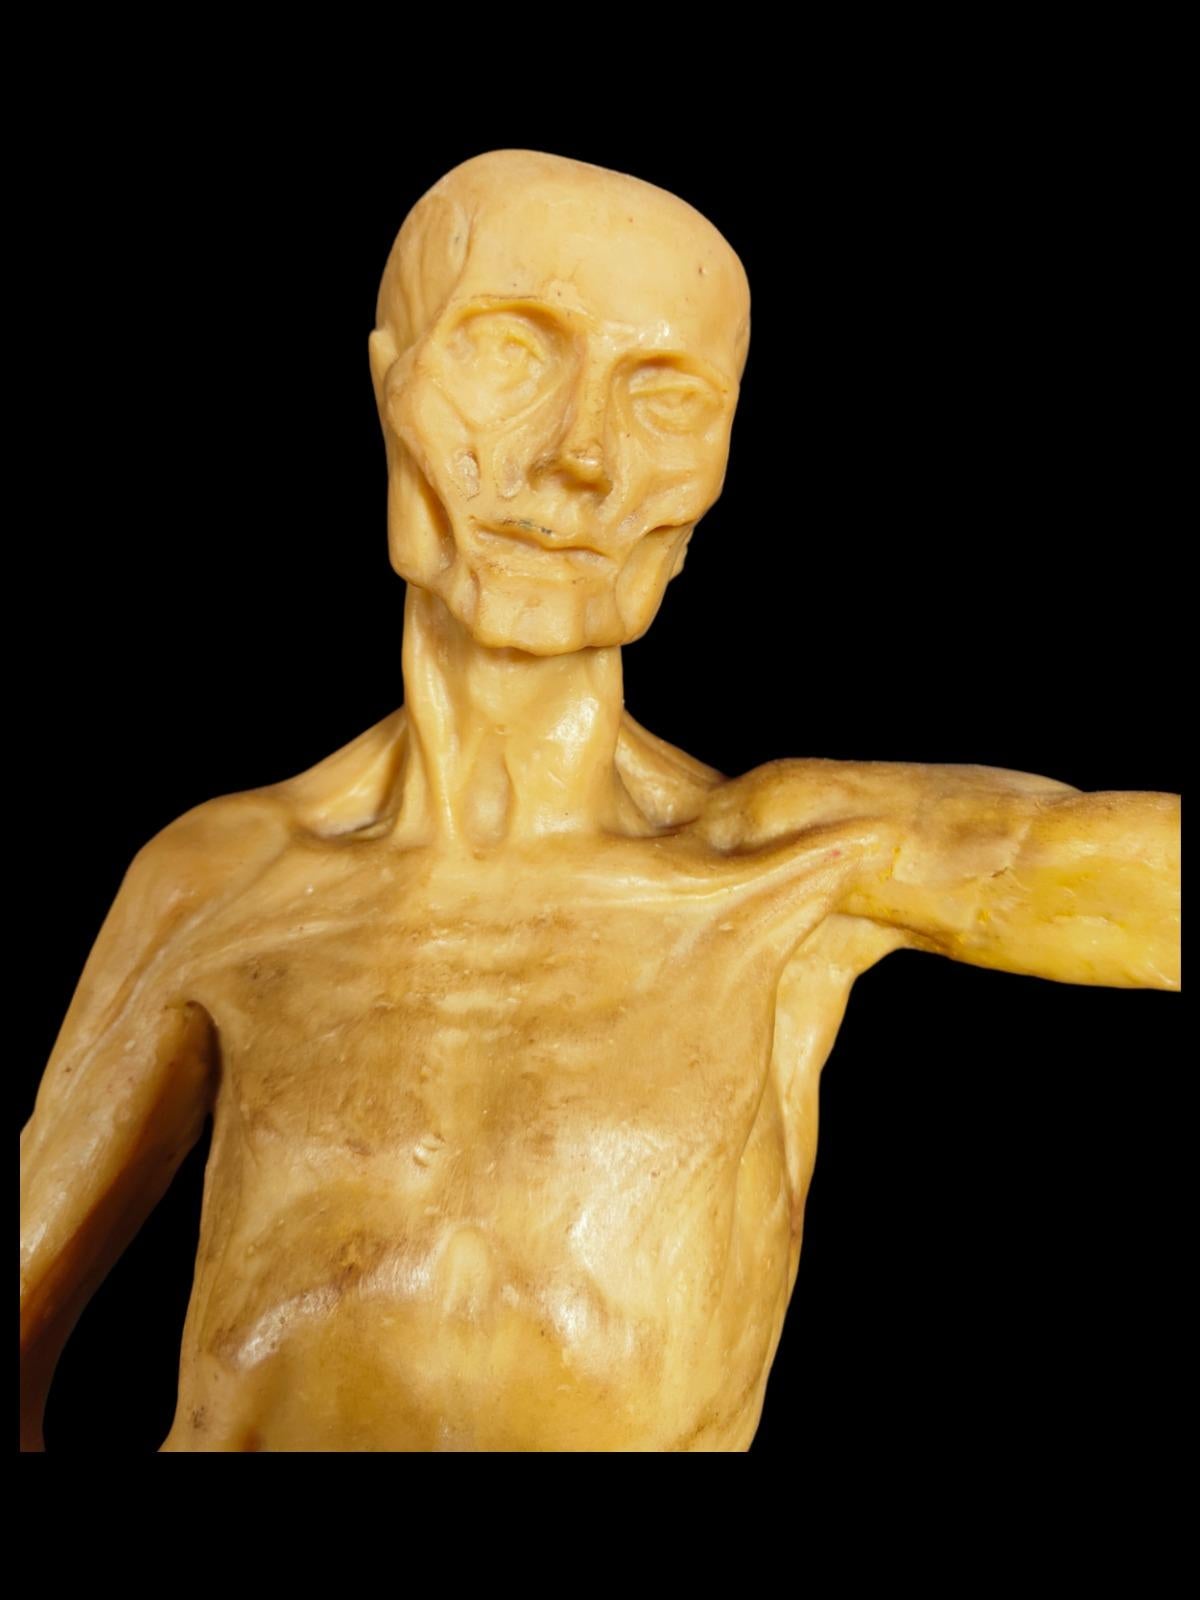 Anatomical model in wax from the 18th century
Extraordinary didactic anatomical model in wax. The use of this type of didactic model disappeared entering the 19th century and with the discovery of the use of other materials to make them that made